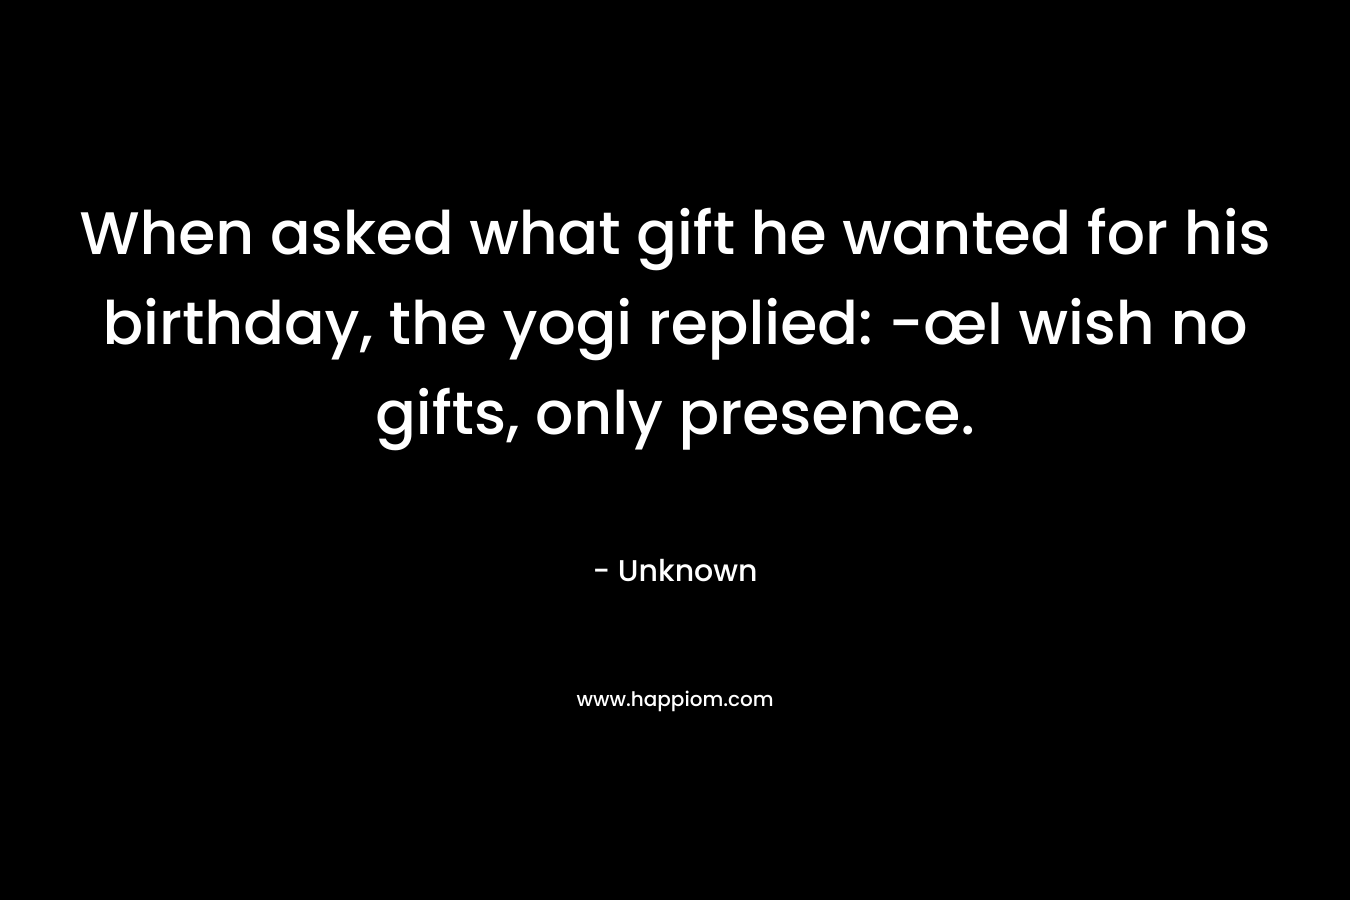 When asked what gift he wanted for his birthday, the yogi replied: -œI wish no gifts, only presence.